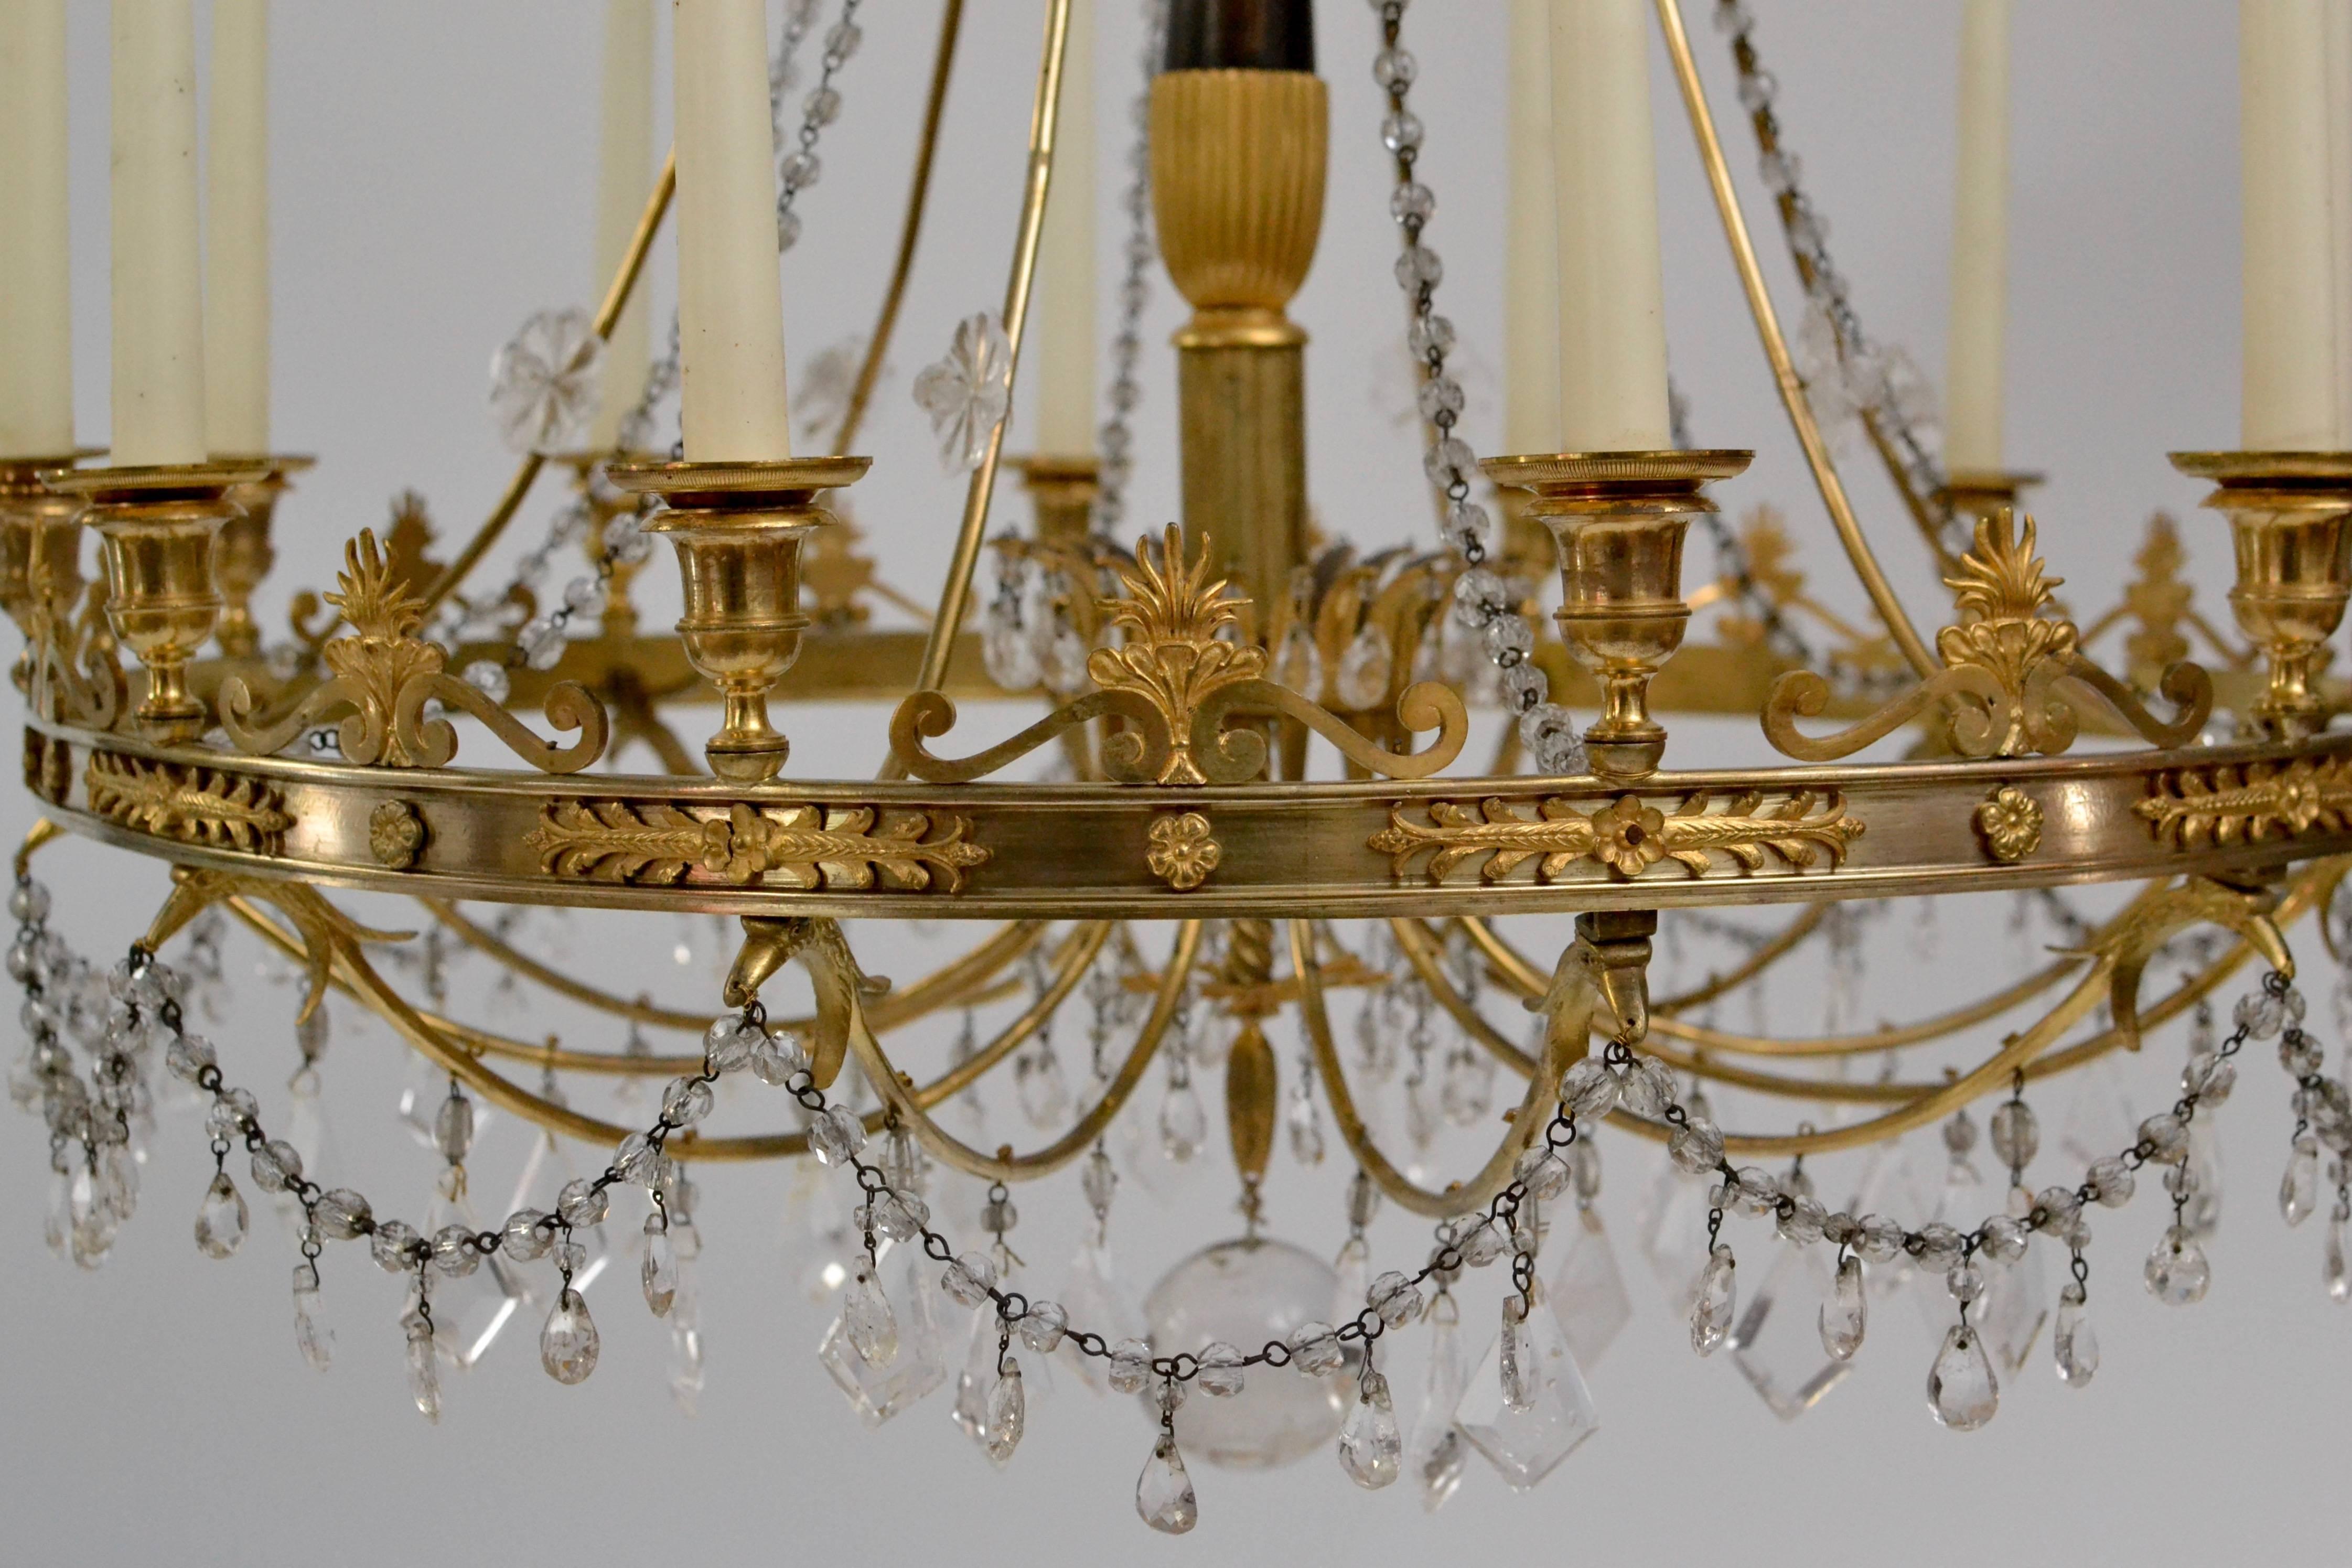 A French early 19th century gilt and patinated bronze chandelier with crystals.